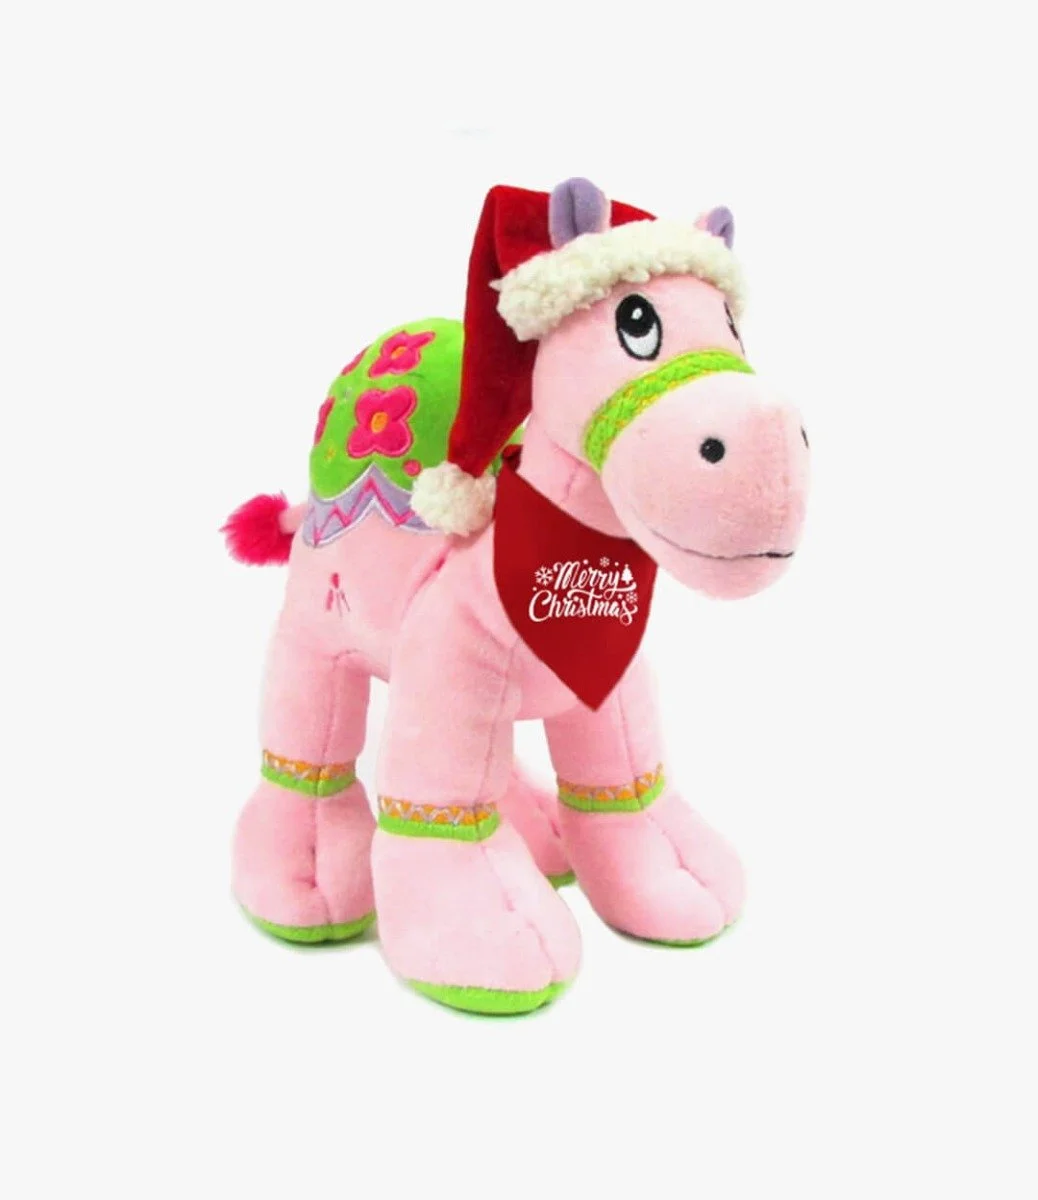 Pink Christmas Camel With Santa Hat And Merry Christmas Bandada 25Cm By Fay Lawson